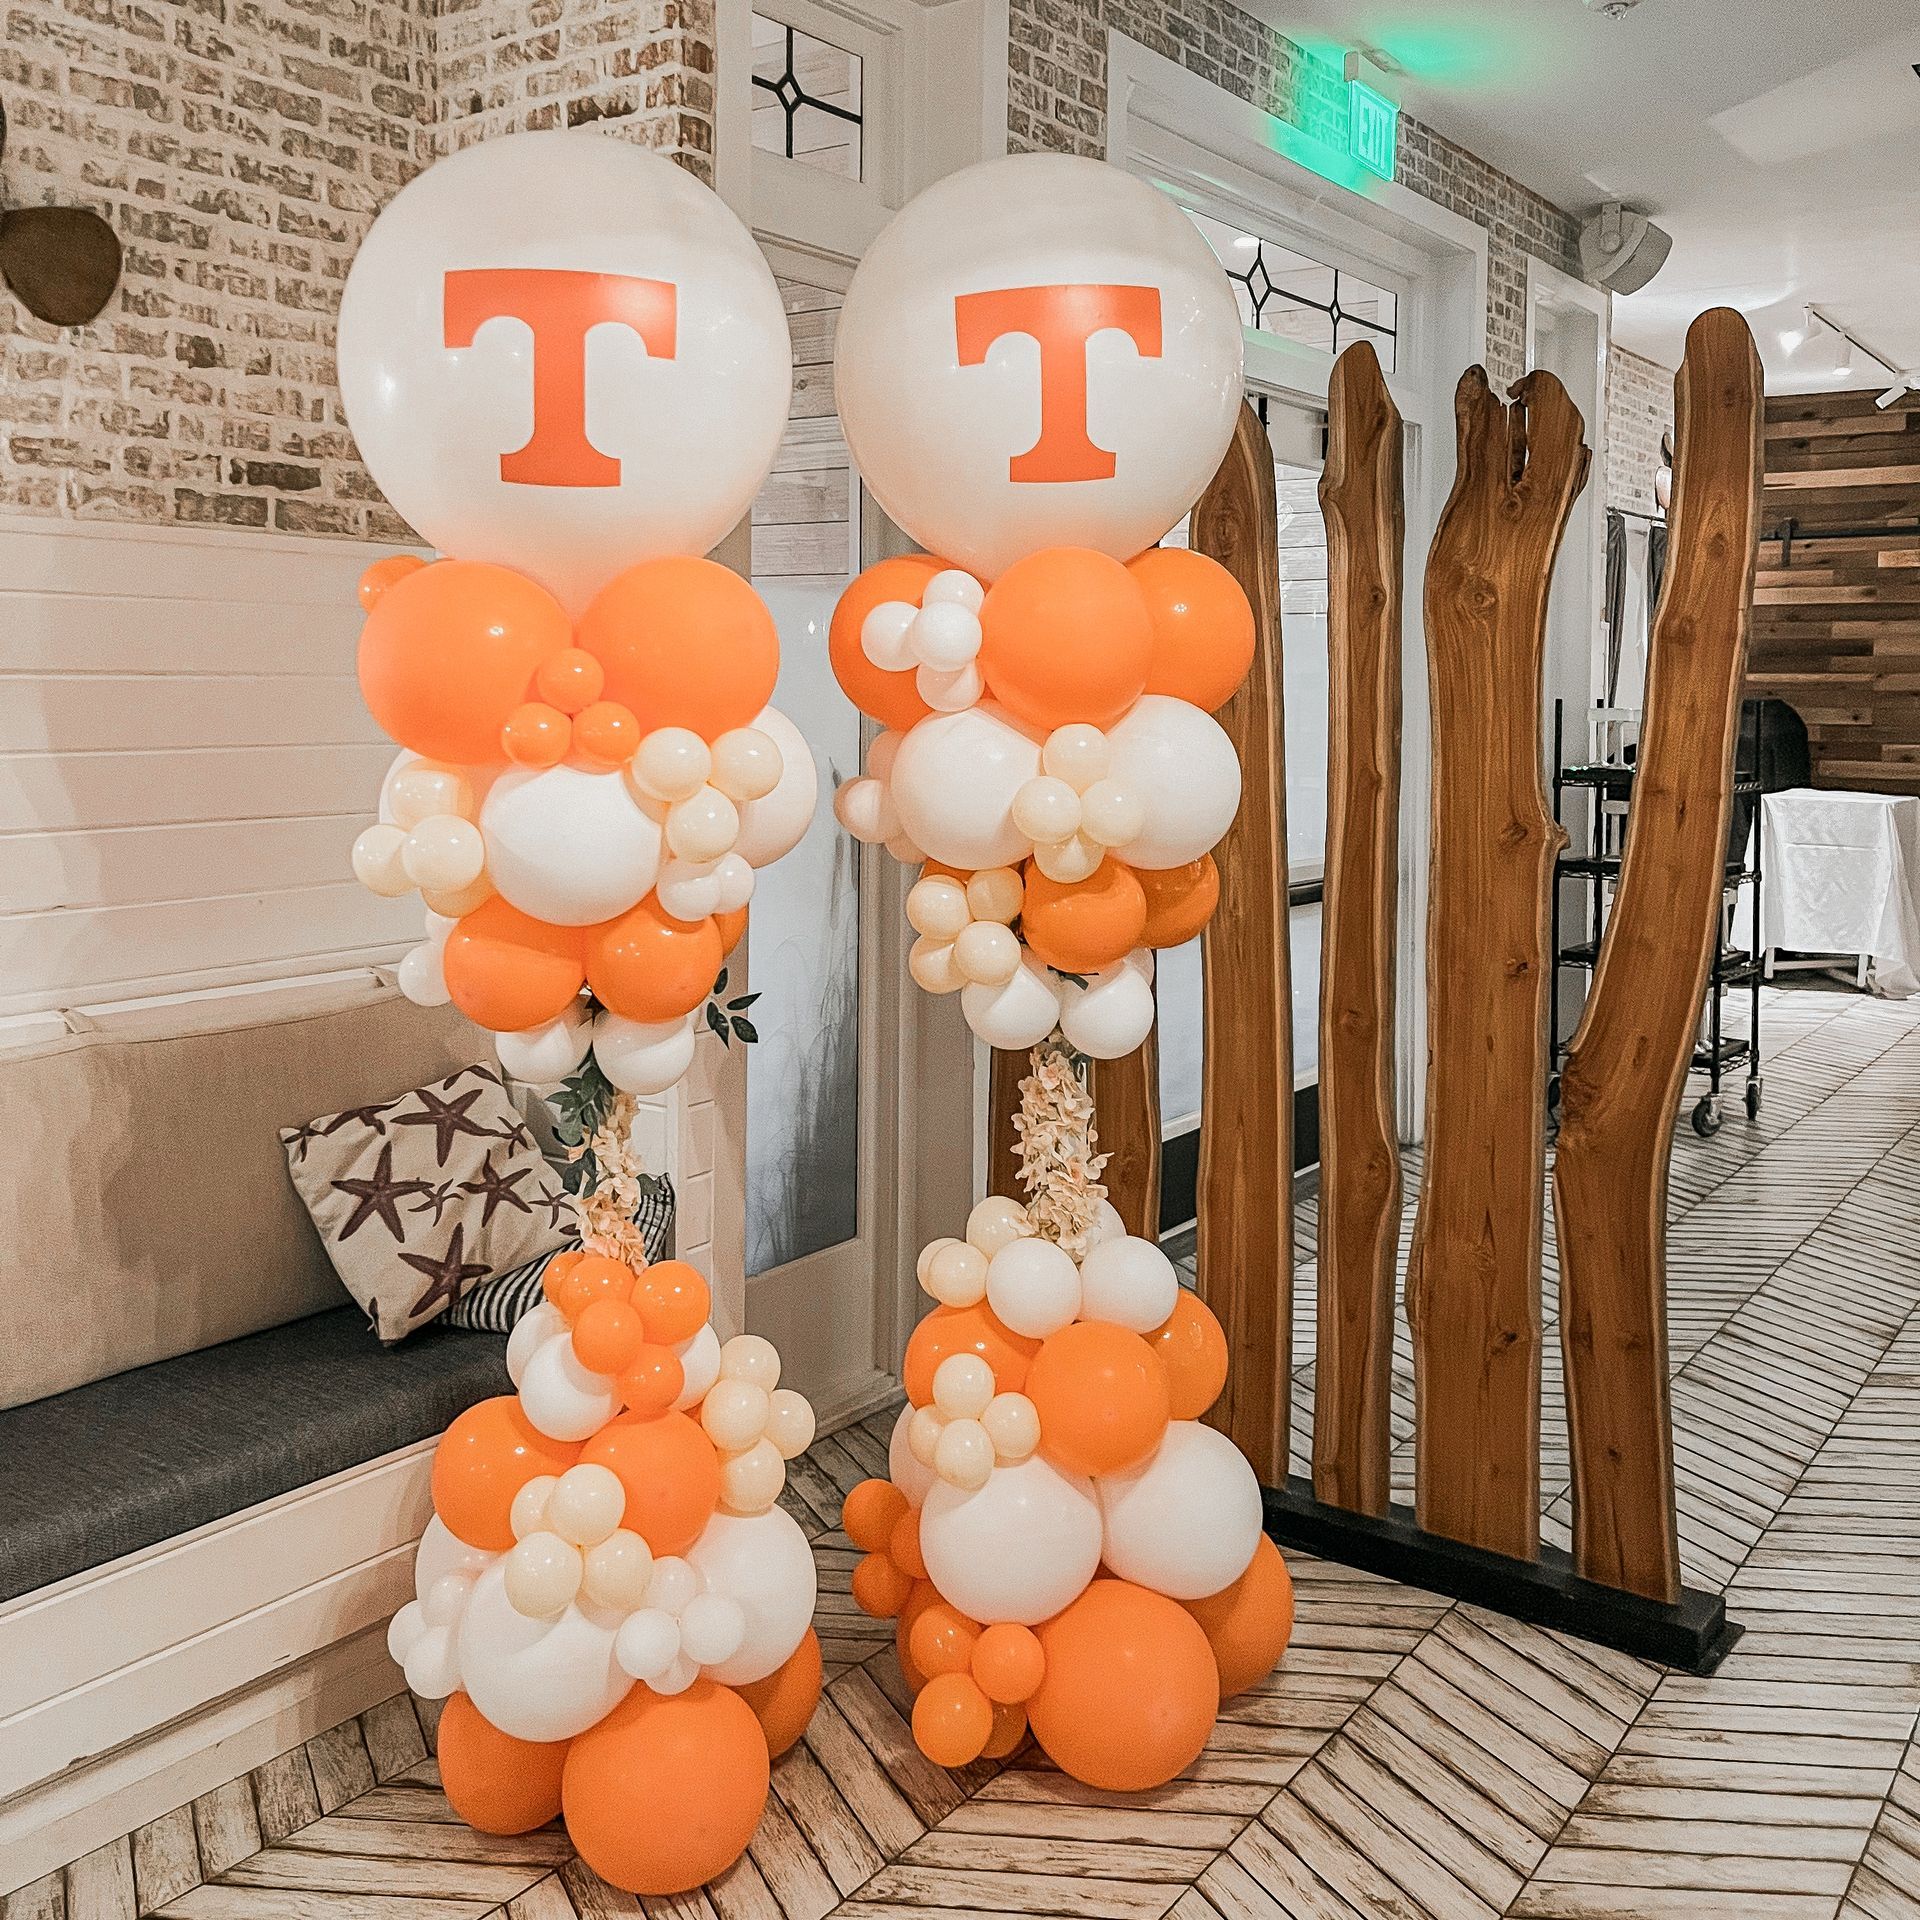 Two columns of orange and white balloons with the letter t on them